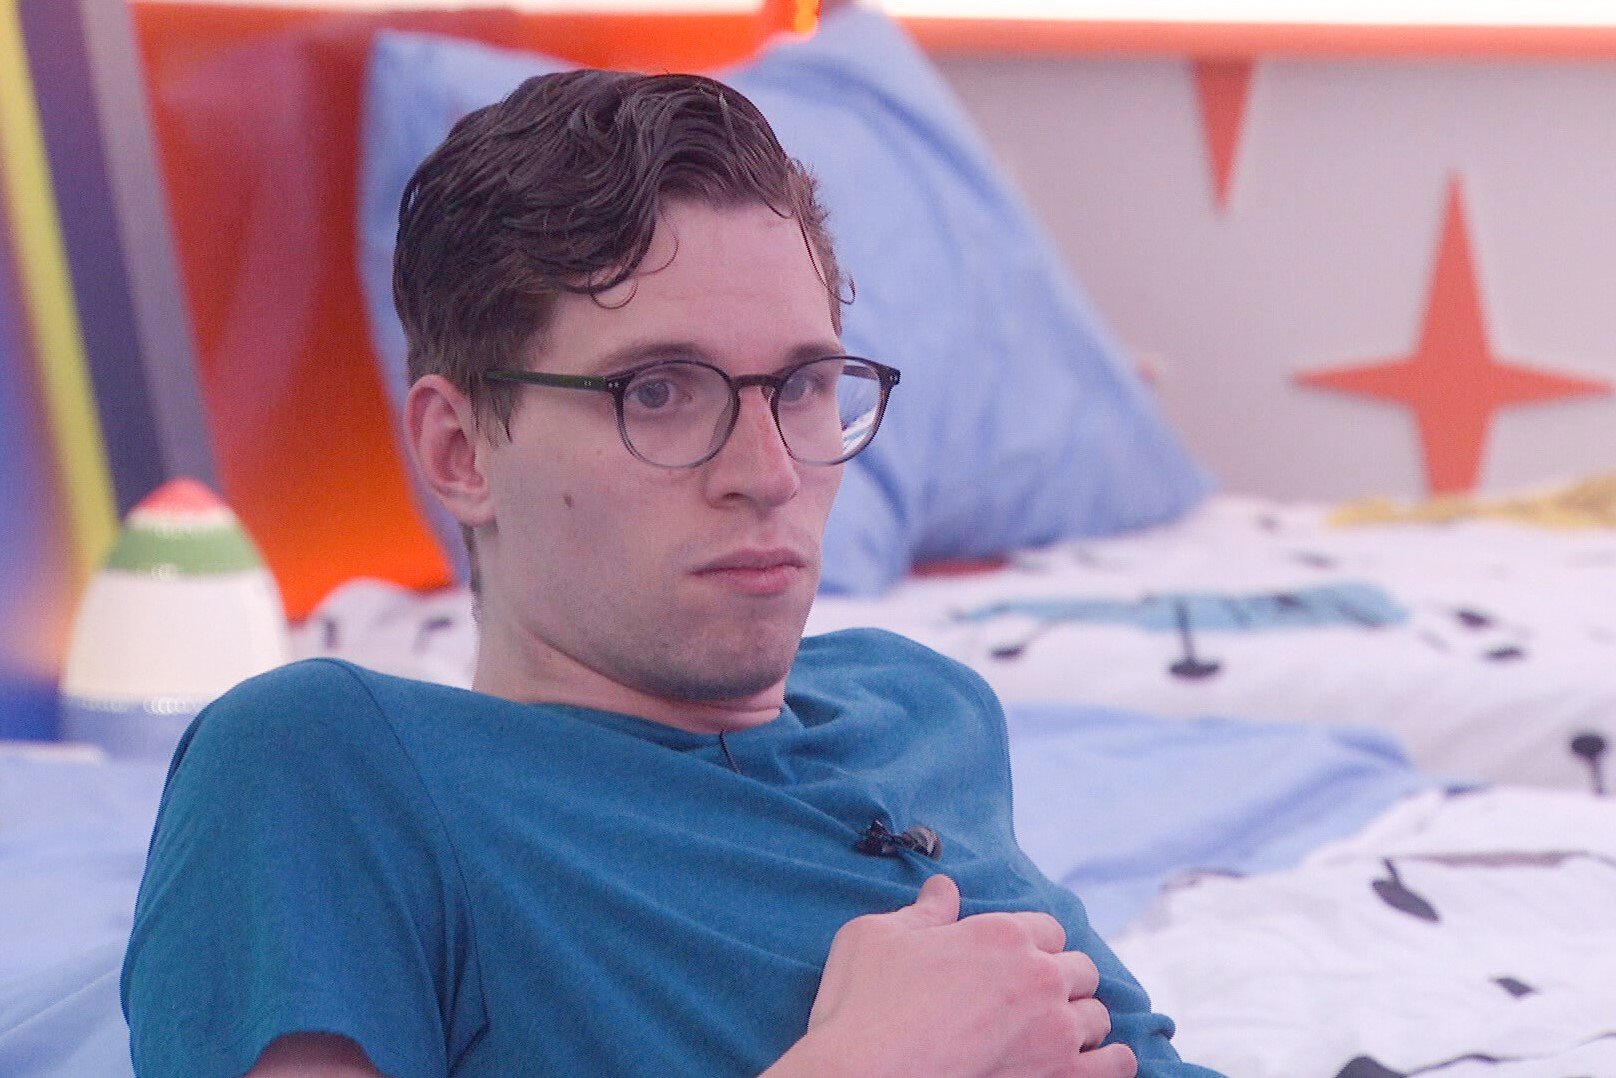 Michael Bruner, a houseguest in 'Big Brother 24' on CBS, wears a blue shirt and glasses.